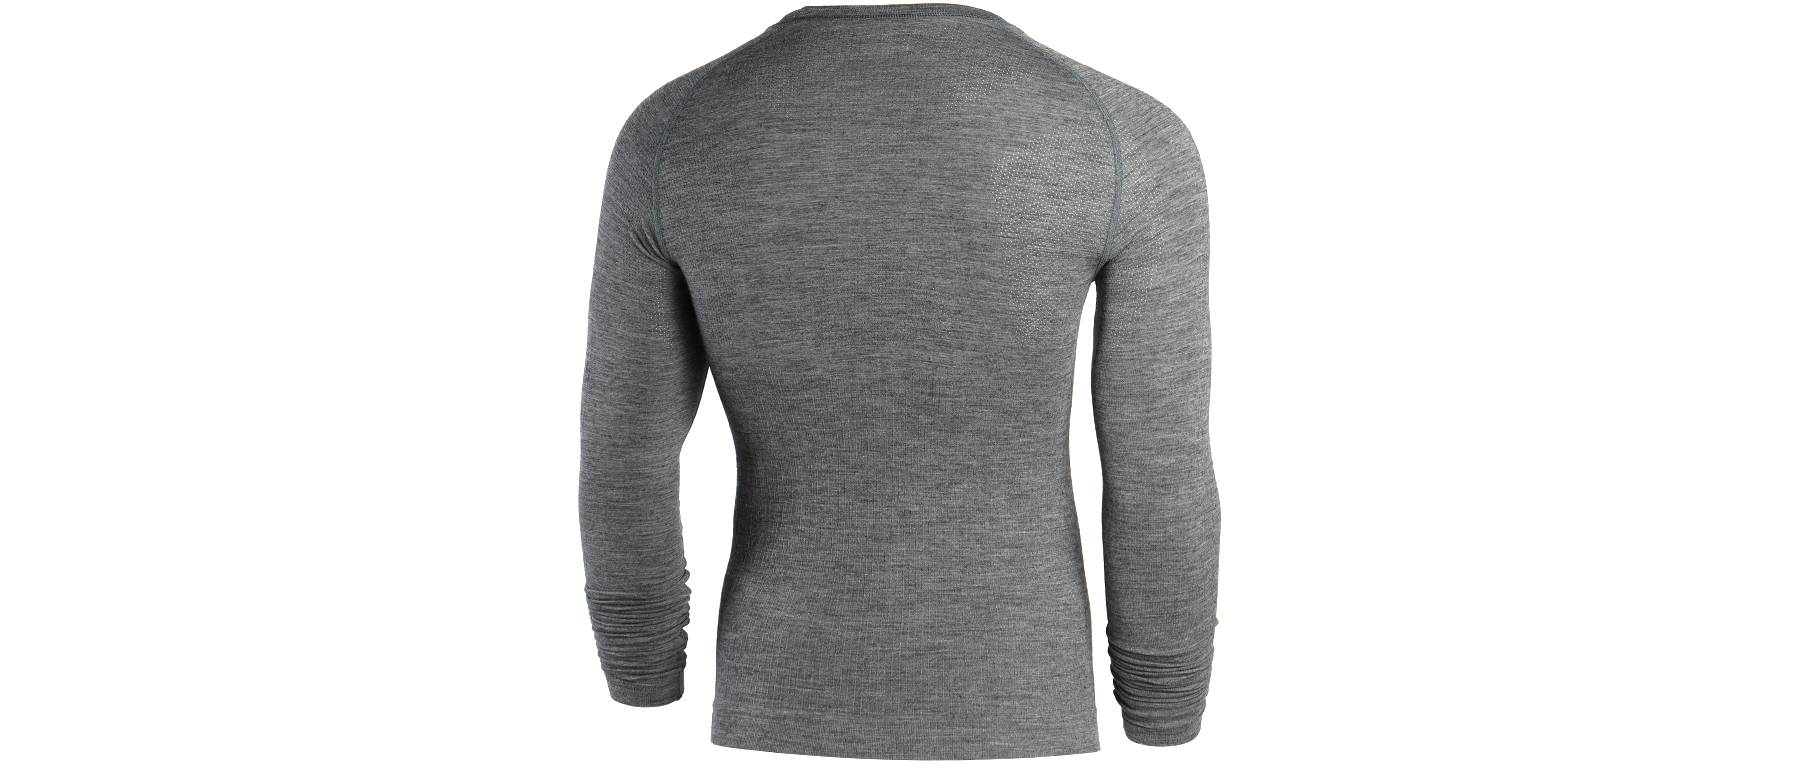 Specialized Seamless Merino LS Base Layer